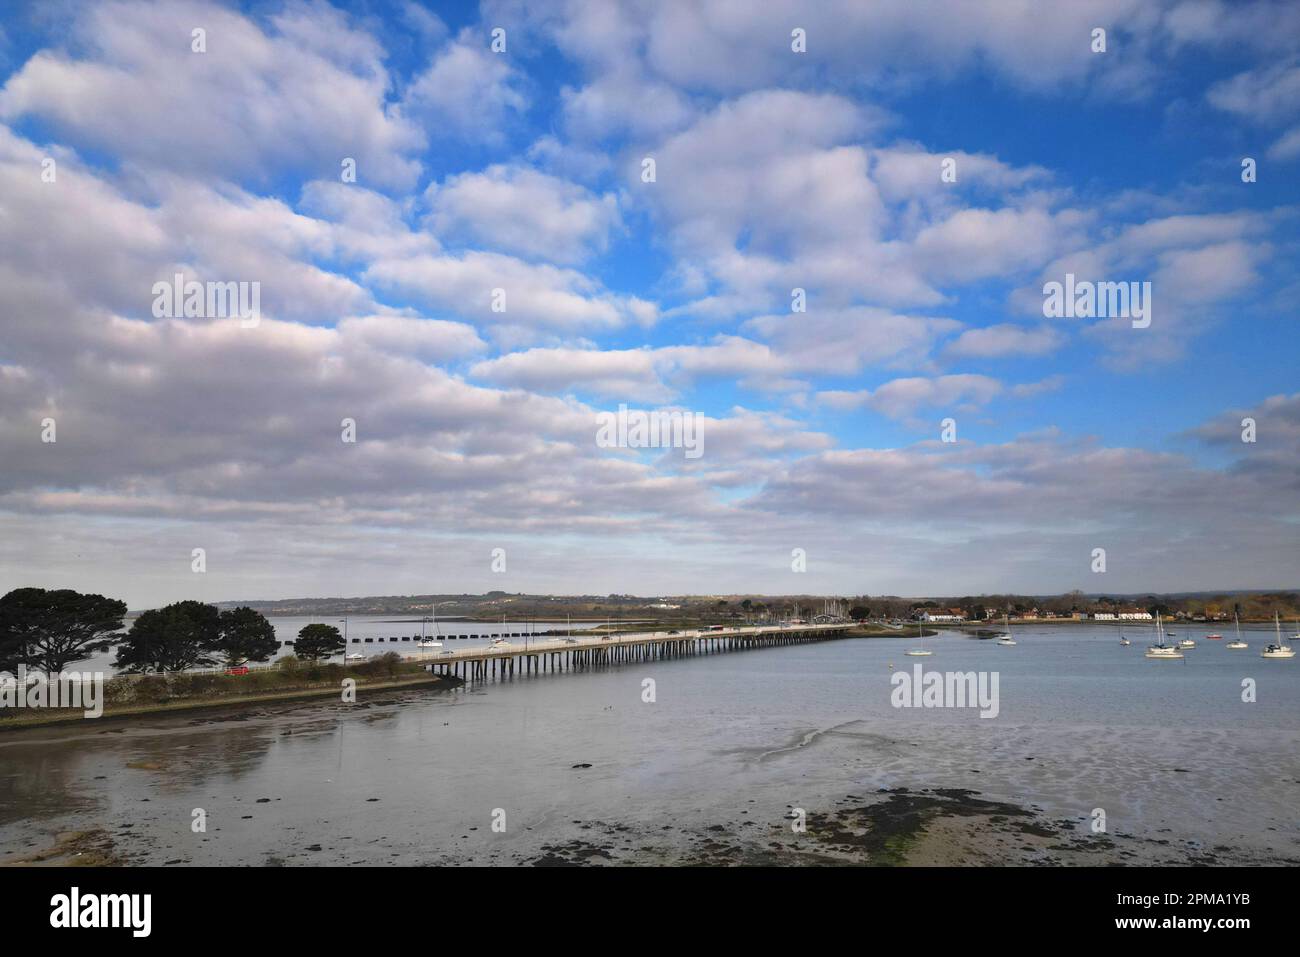 aerial view of the bridge linking hayling island to the mainland of hampshire on the south coast of england Stock Photo